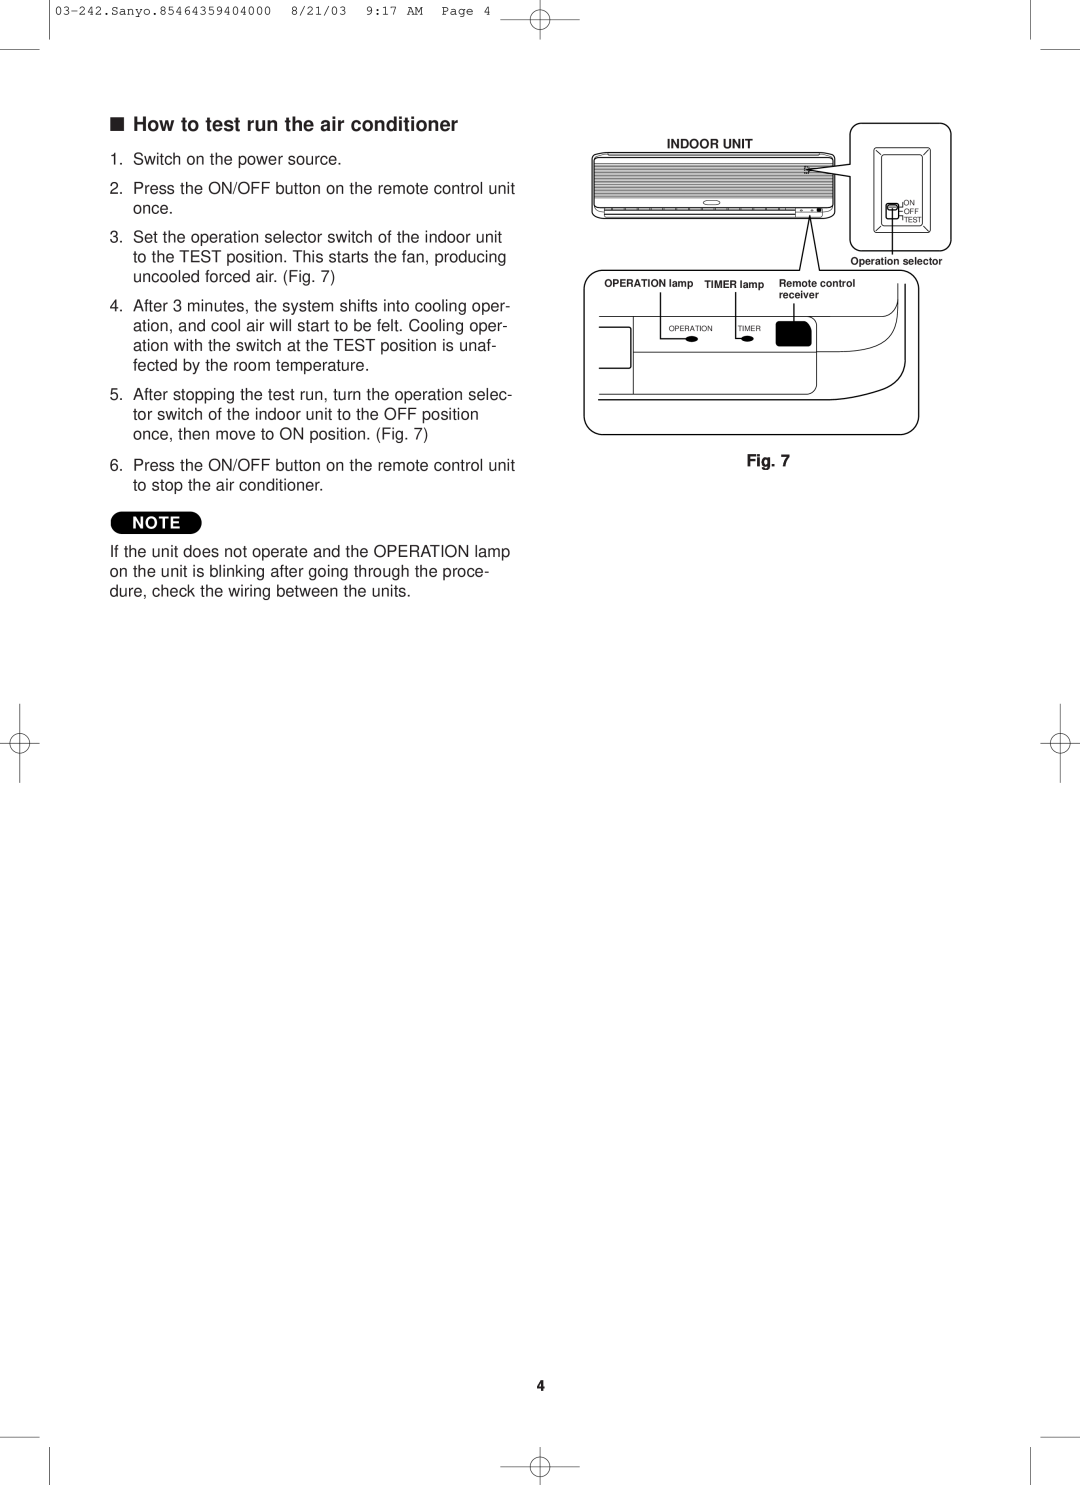 Sanyo RCS-KS2432AWD installation instructions How to test run the air conditioner 